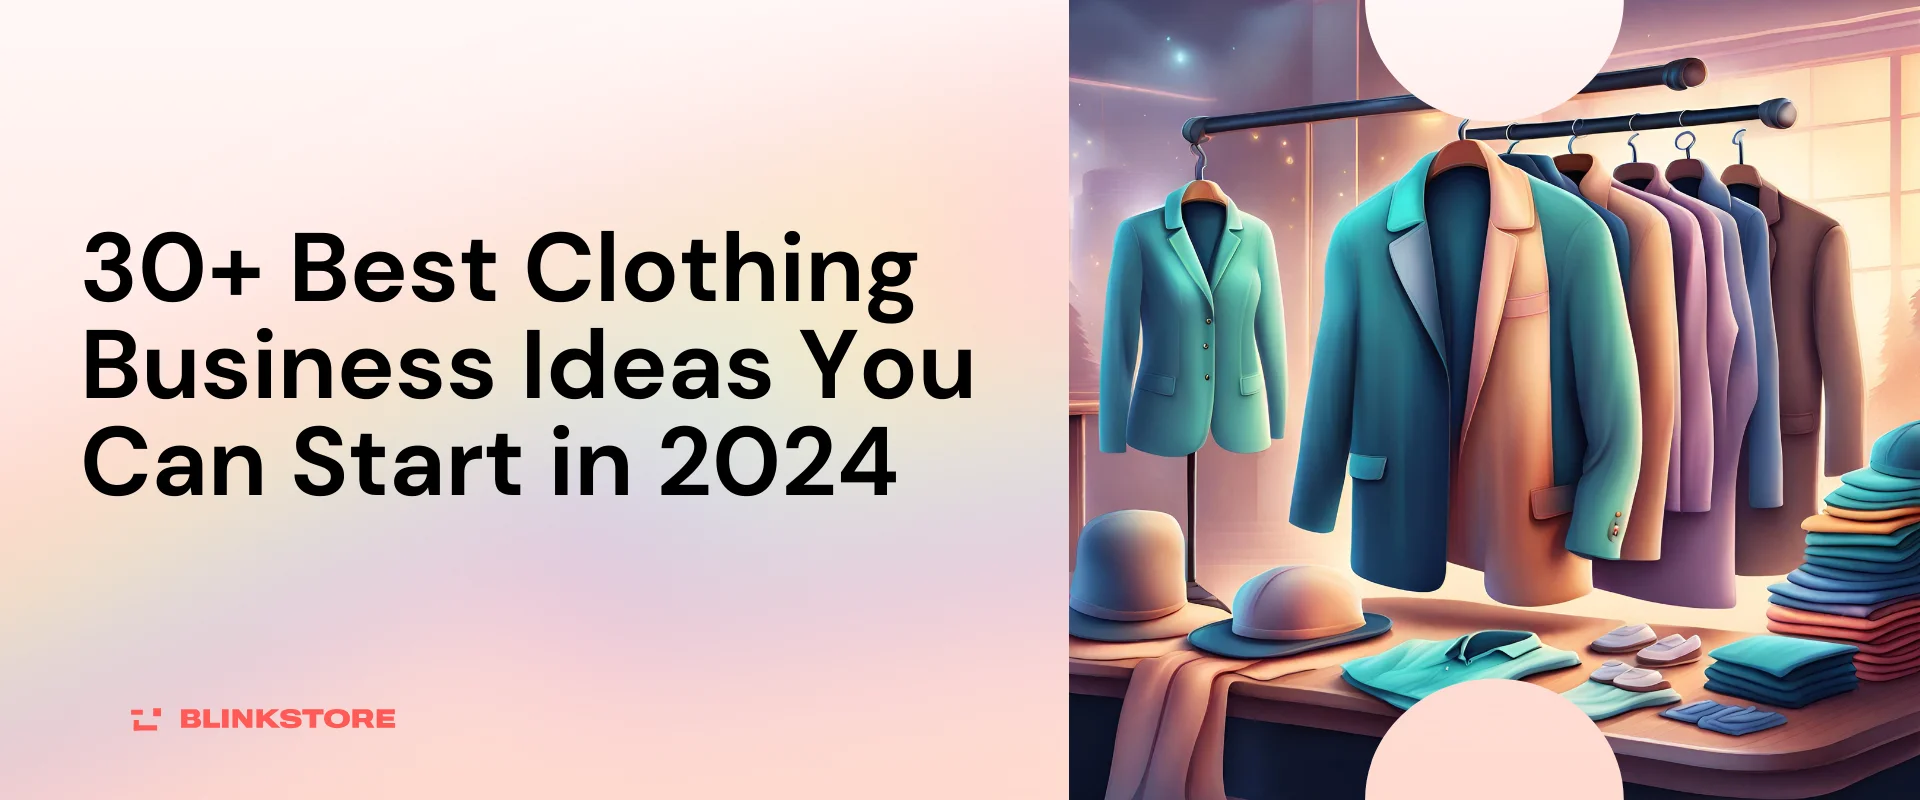 Clothing Business Ideas